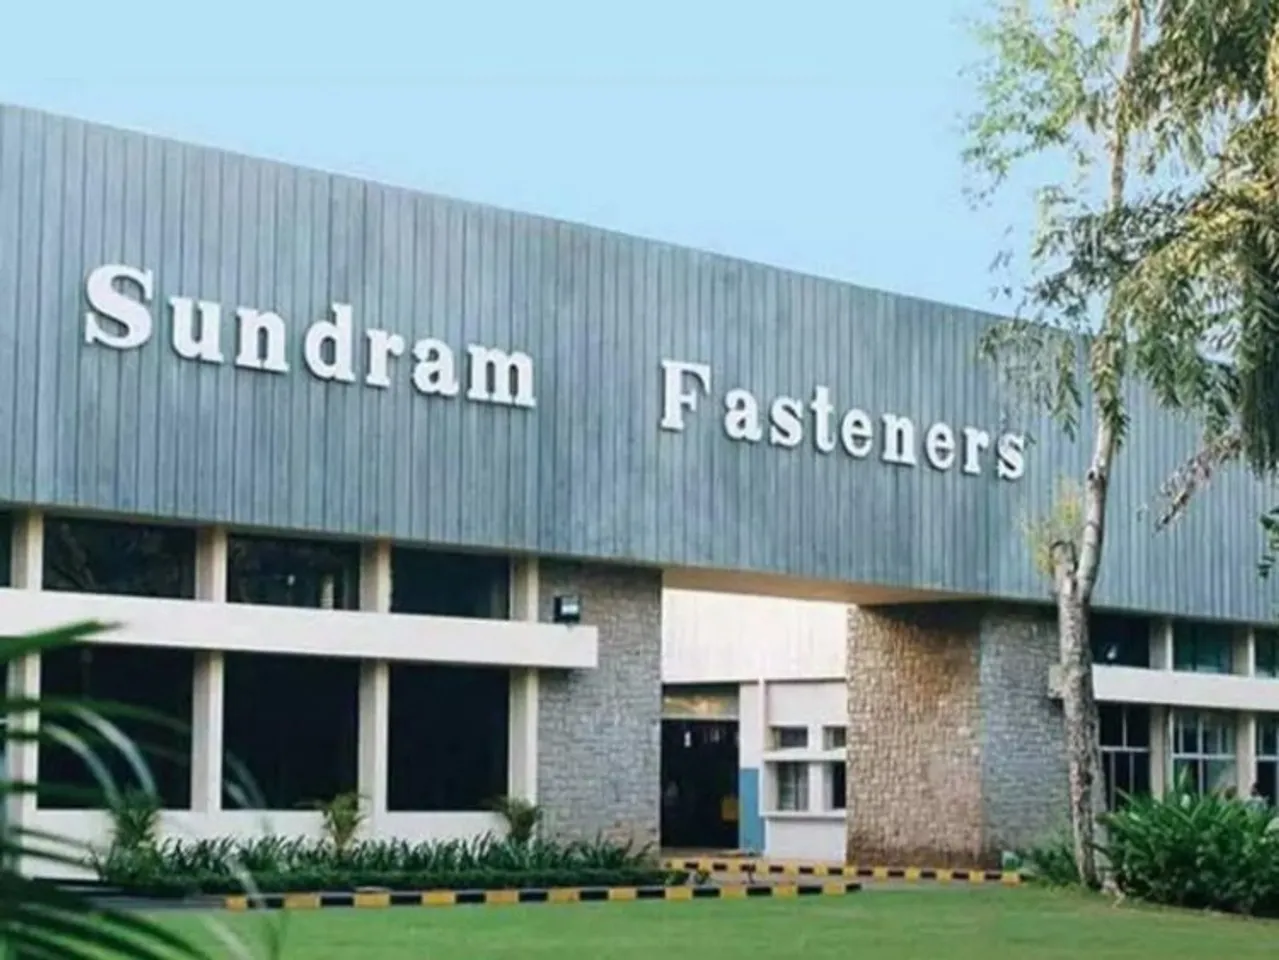 Sundram Fasteners lines up Rs 350 Cr capex plan to make power train sub-assemblies for EVs